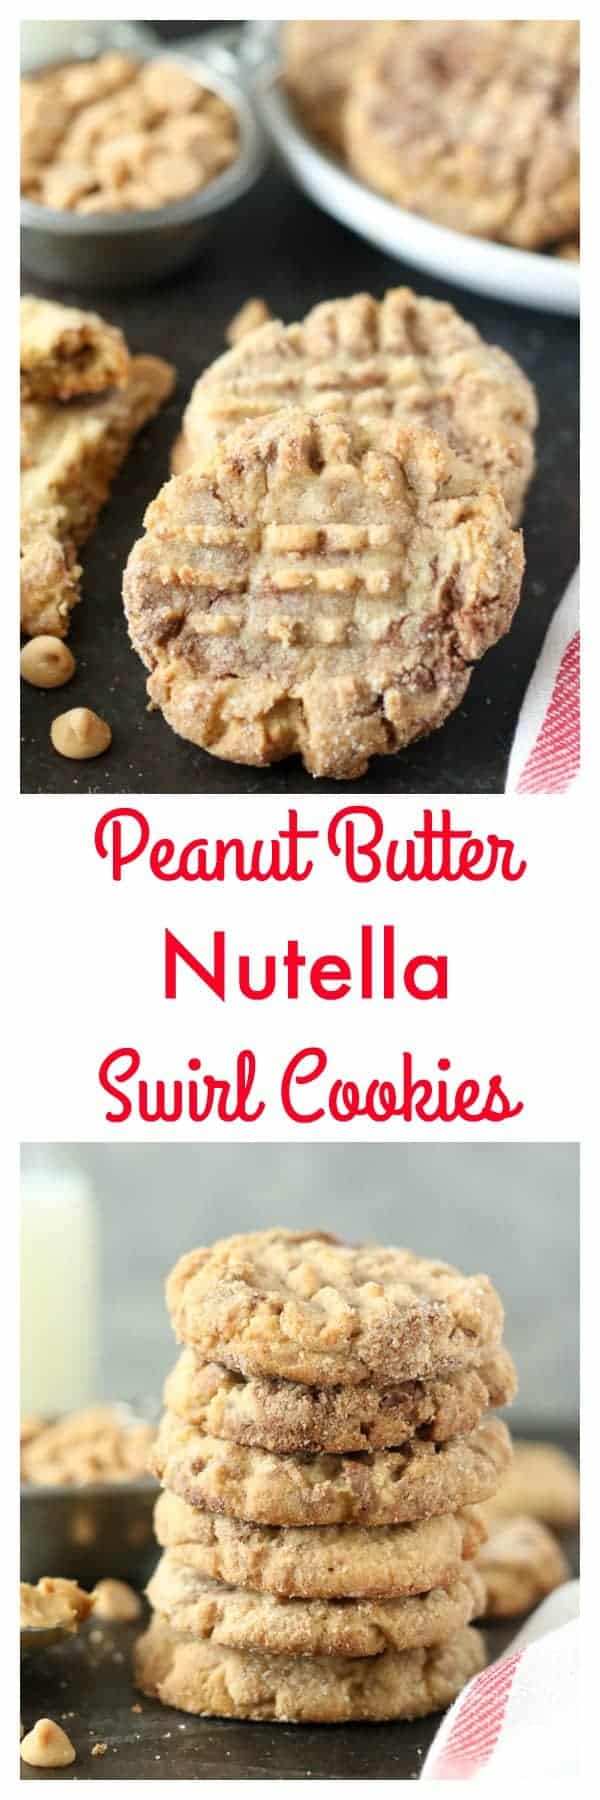  These Peanut Butter Nutella Swirl Cookies are as dreamy as they look! A soft-baked peanut butter cookie swirled with Nutella and rolled in sugar.